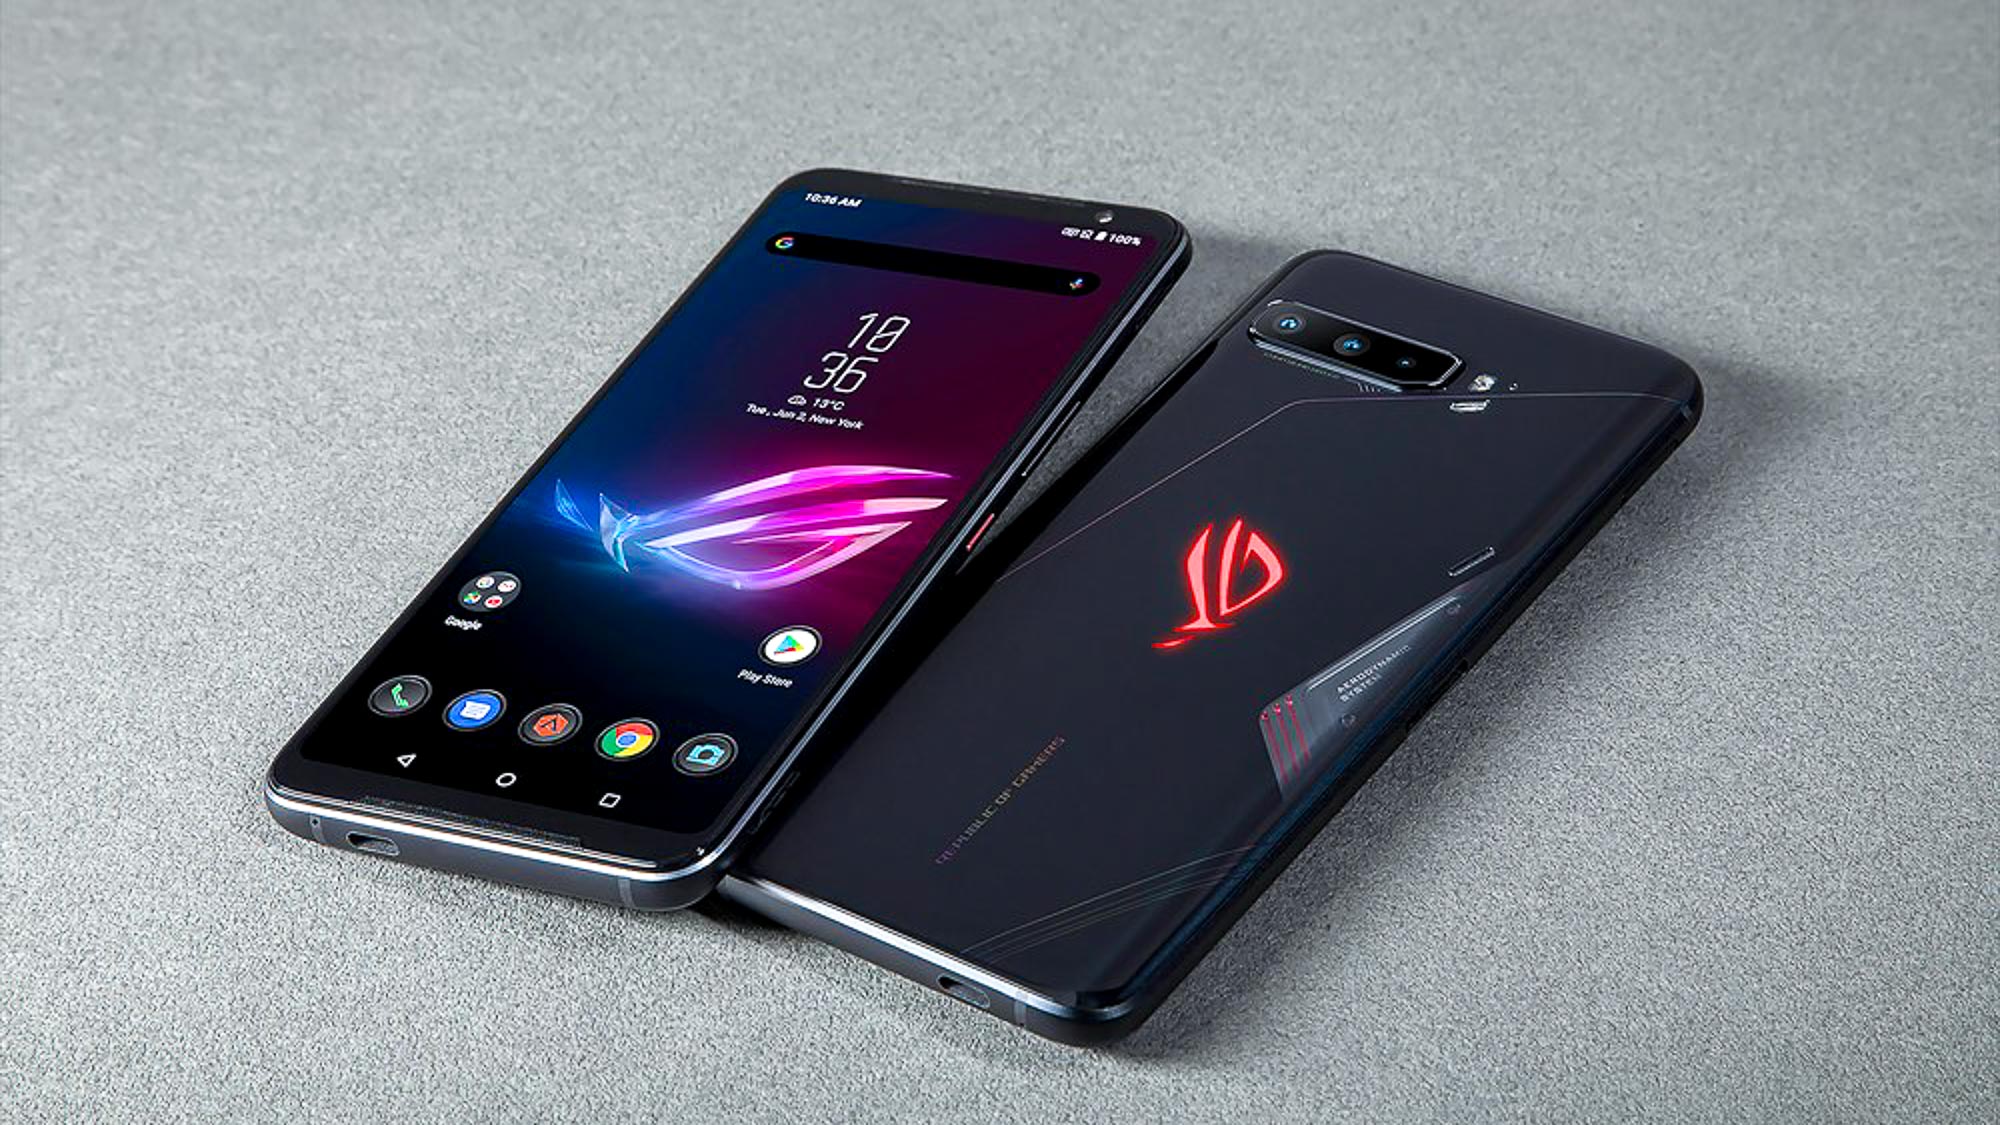 Asus ROG Phone 5 Launched